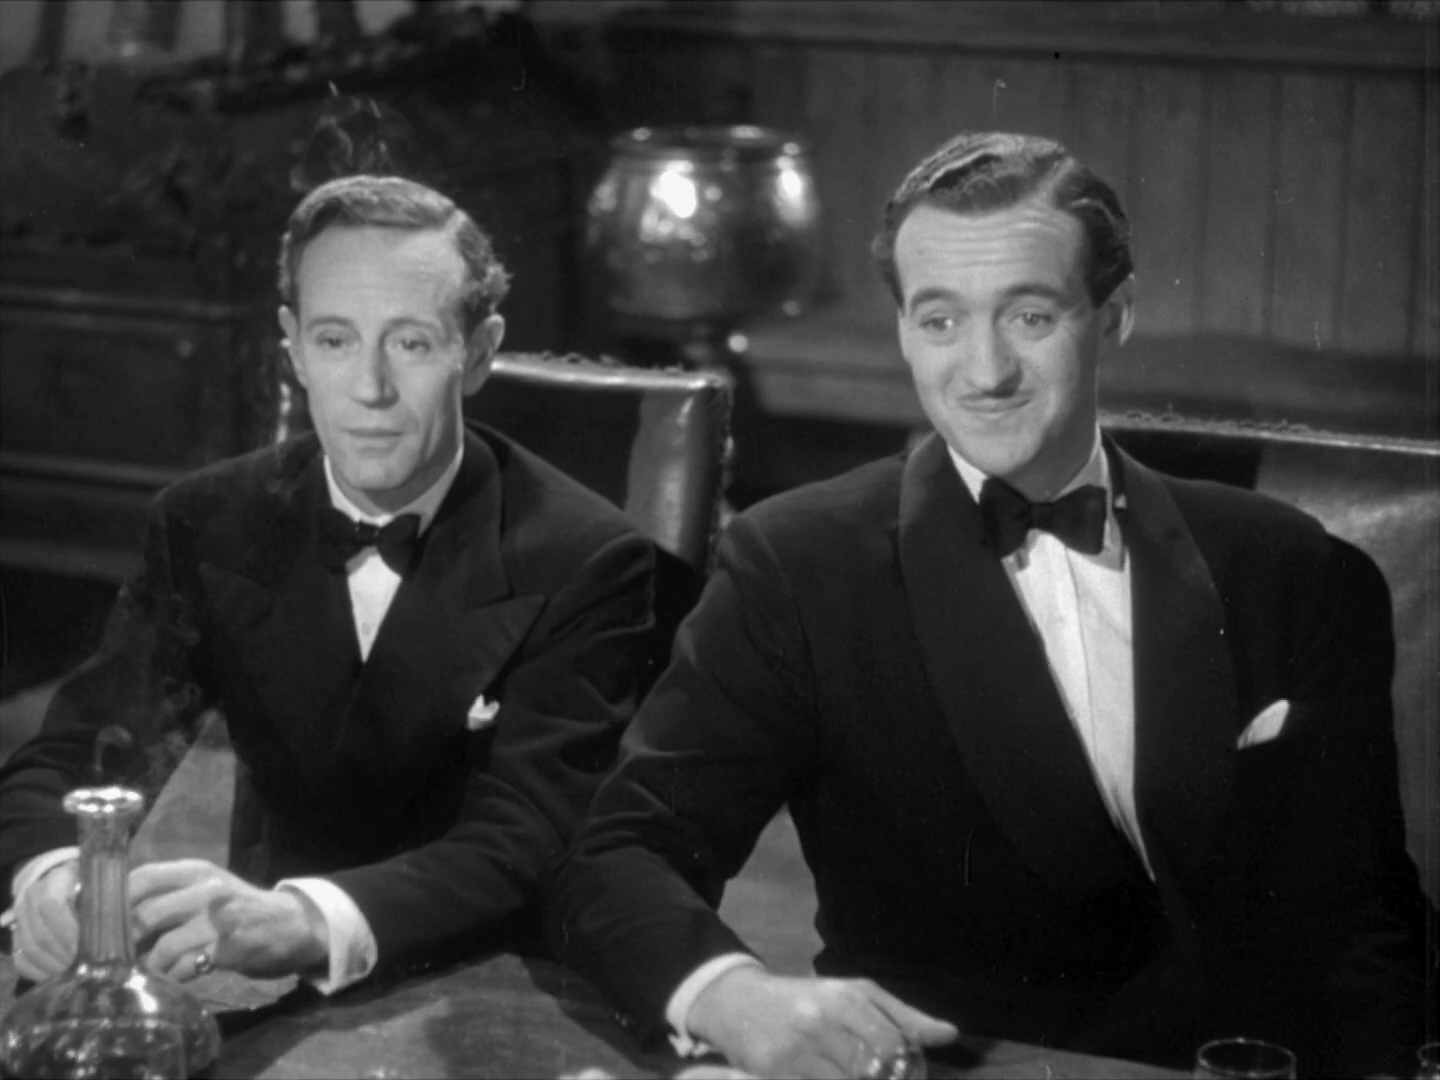 Howard and Niven in dinner attire in The First of the Few